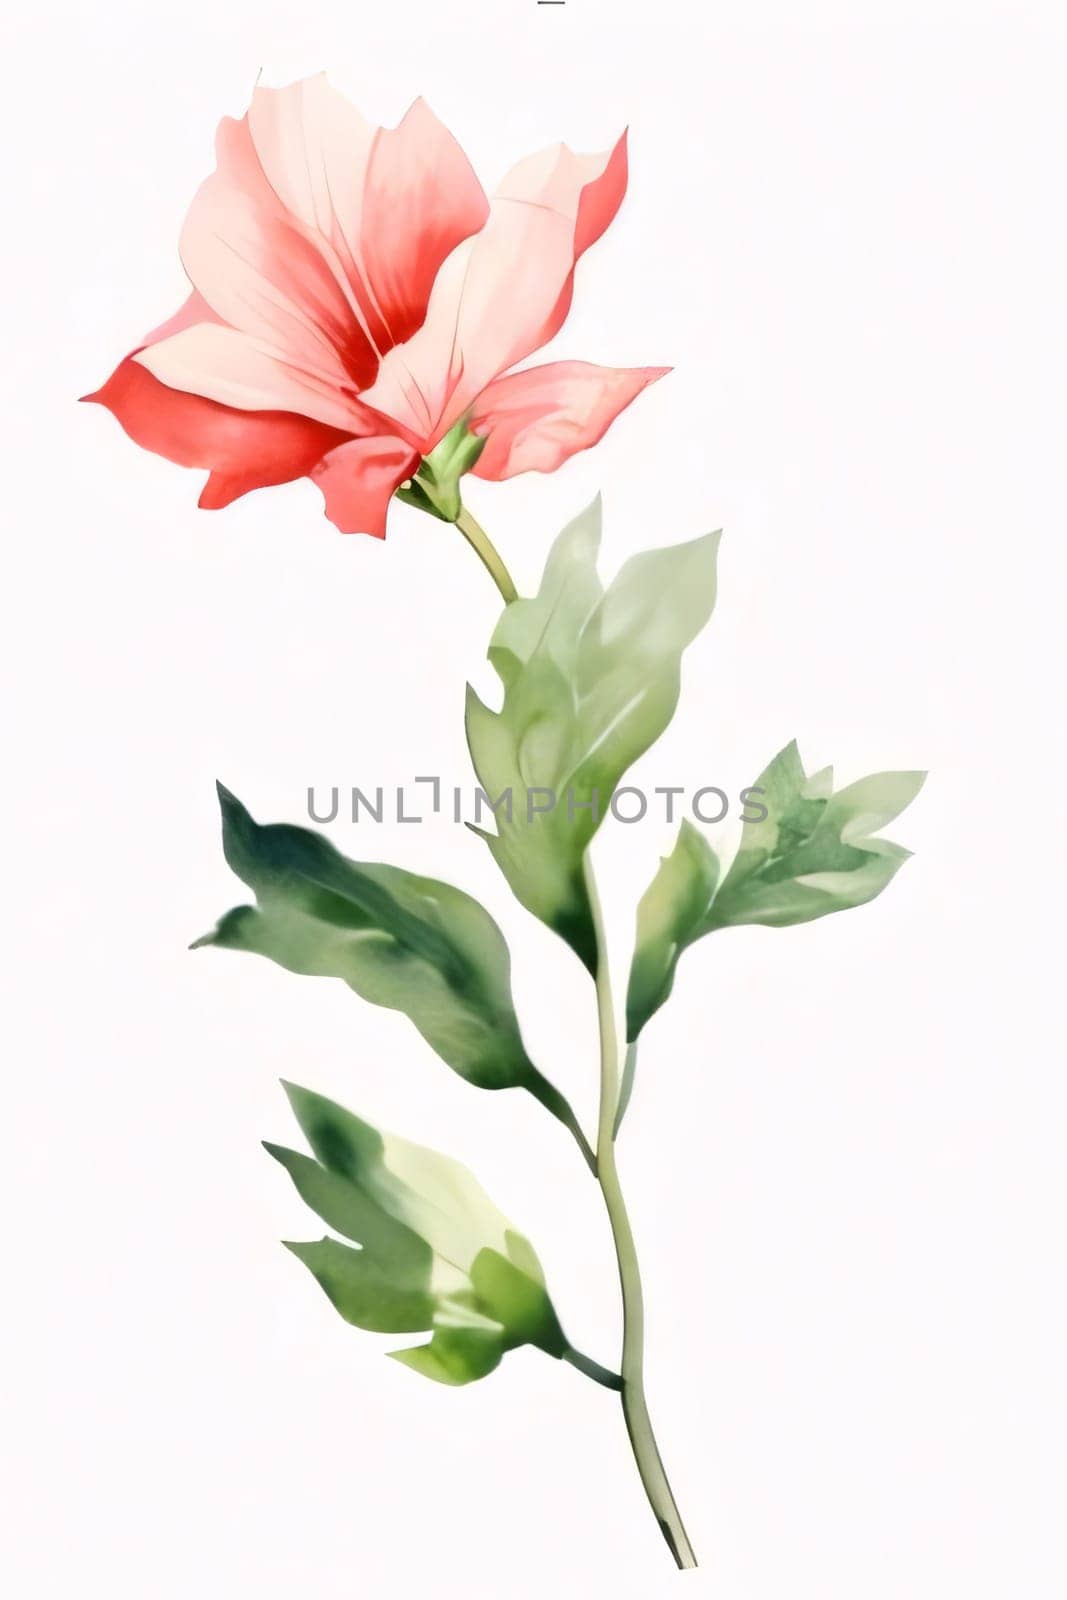 Drawn, painted pink rose flower on isolated white background. Flowering flowers, a symbol of spring, new life. A joyful time of nature waking up to life.